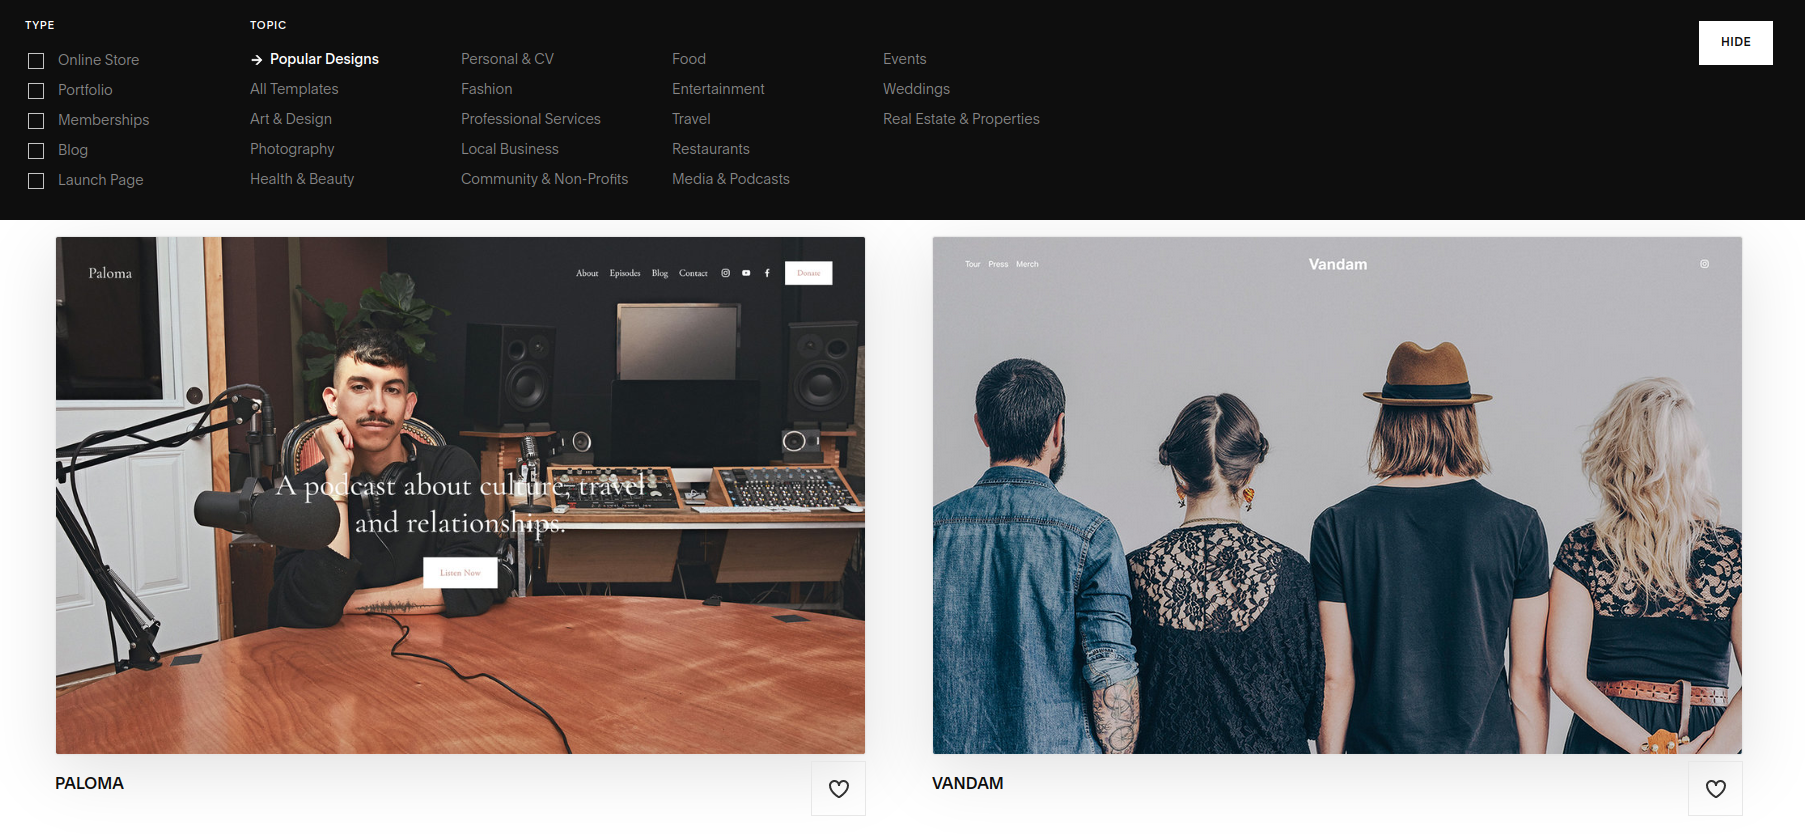 Squarespace for an online store